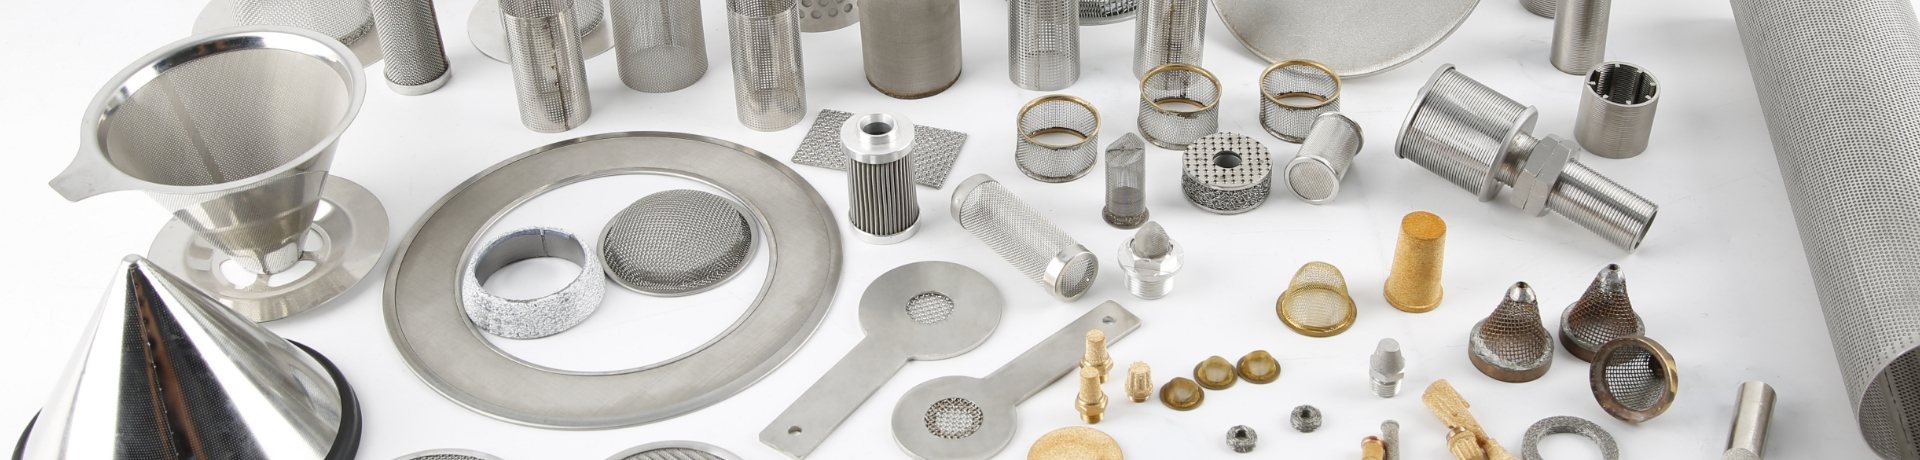 Metal filter elements in different sizes and shapes